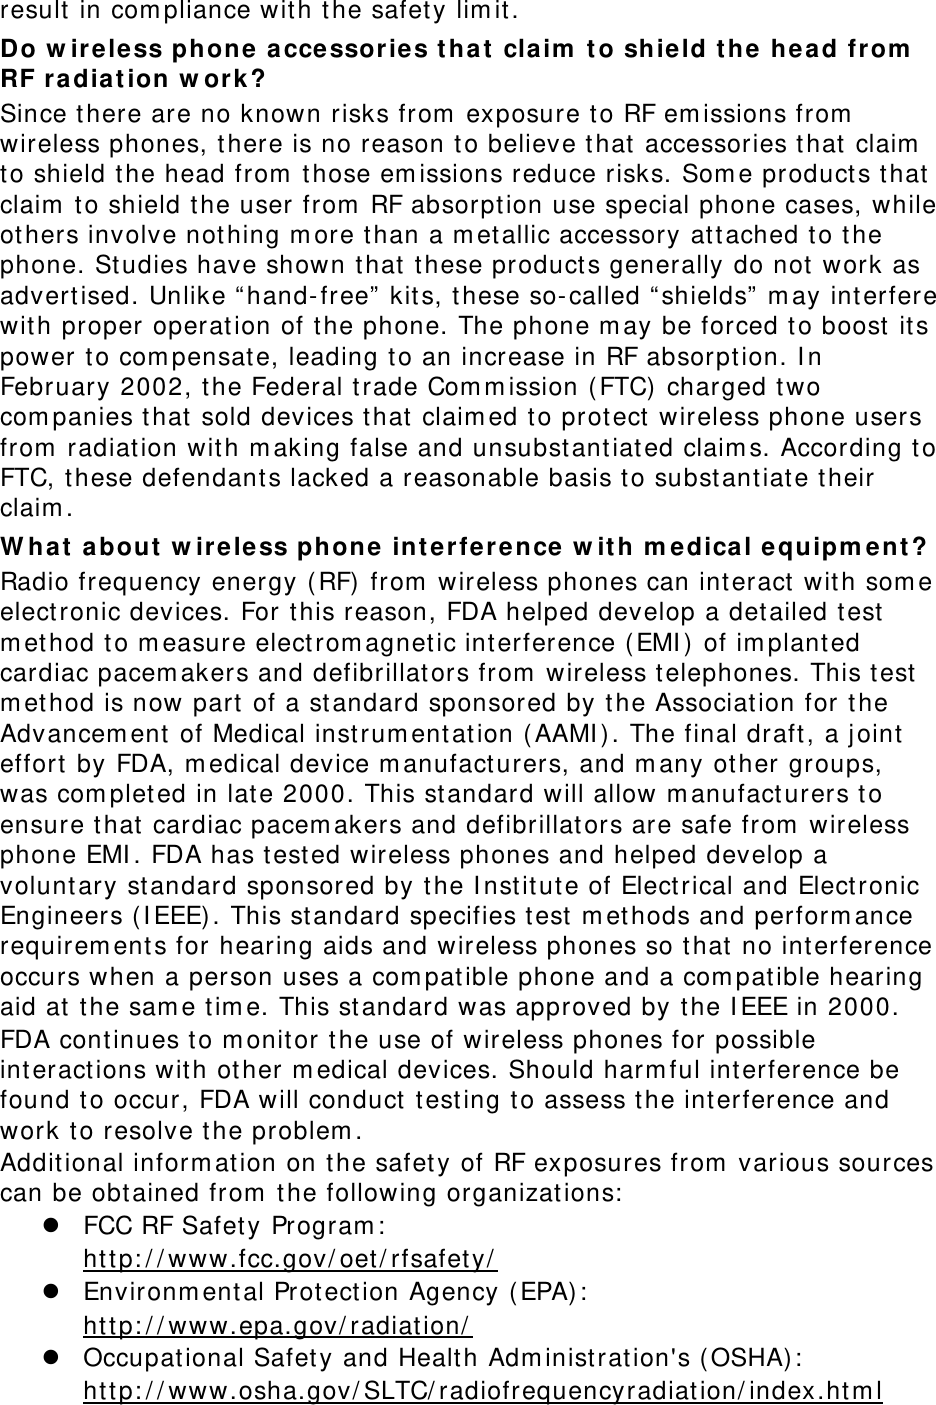 result in com pliance with t he safet y lim it. Do w ir e less phone  accessories t hat  claim  t o sh ie ld t he he a d from  RF ra dia t ion w ork ? Since there are no known risks from  exposure to RF em issions from  wireless phones, there is no reason t o believe t hat accessories that  claim  to shield the head from  t hose em issions reduce risks. Som e product s t hat claim  t o shield t he user from  RF absorpt ion use special phone cases, while others involve not hing m ore than a m et allic accessory at tached t o t he phone. St udies have shown t hat t hese products generally do not work as advertised. Unlike “ hand- free”  kits, t hese so-called “ shields”  m ay int erfere with proper operation of t he phone. The phone m ay be forced t o boost  its power t o com pensat e, leading to an increase in RF absorption. I n February 2002, t he Federal t rade Com m ission ( FTC) charged t wo com panies t hat sold devices t hat claim ed t o protect  wireless phone users from  radiat ion with m aking false and unsubstantiat ed claim s. According t o FTC, these defendants lacked a reasonable basis t o substantiat e their claim . W hat  a bout  w ire less phone int e r fe r e nce  w it h m e dical e quipm ent ? Radio frequency energy ( RF) from  wireless phones can int eract  wit h som e elect ronic devices. For t his reason, FDA helped develop a det ailed test  m et hod t o m easure elect rom agnet ic int erference ( EMI )  of im planted cardiac pacem akers and defibrillators from  wireless t elephones. This t est  m et hod is now part  of a standard sponsored by t he Association for t he Advancem ent of Medical instrum ent ation ( AAMI ) . The final draft, a j oint effort  by FDA, m edical device m anufact urers, and m any other groups, was com plet ed in lat e 2000. This standard will allow m anufact urers t o ensure t hat cardiac pacem akers and defibrillators are safe from  wireless phone EMI . FDA has t est ed wireless phones and helped develop a voluntary st andard sponsored by t he I nstitut e of Electrical and Elect ronic Engineers ( I EEE) . This standard specifies t est m et hods and perform ance requirem ent s for hearing aids and wireless phones so t hat no int erference occurs when a person uses a com pat ible phone and a com pat ible hearing aid at  t he sam e t im e. This st andard was approved by t he I EEE in 2000. FDA continues to m onitor t he use of wireless phones for possible interactions wit h ot her m edical devices. Should harm ful int erference be found t o occur, FDA will conduct t esting t o assess t he interference and work to resolve the problem . Additional inform ation on t he safet y of RF exposures from  various sources can be obtained from  t he following organizat ions:  z FCC RF Safet y Program :   htt p: / / www.fcc.gov/ oet / rfsafet y/  z Environm ental Protect ion Agency ( EPA) :   htt p: / / www.epa.gov/ radiation/  z Occupational Safety and Health Adm inist rat ion&apos;s ( OSHA) :          ht tp: / / www.osha.gov/ SLTC/ radiofrequencyradiat ion/ index.ht m l 